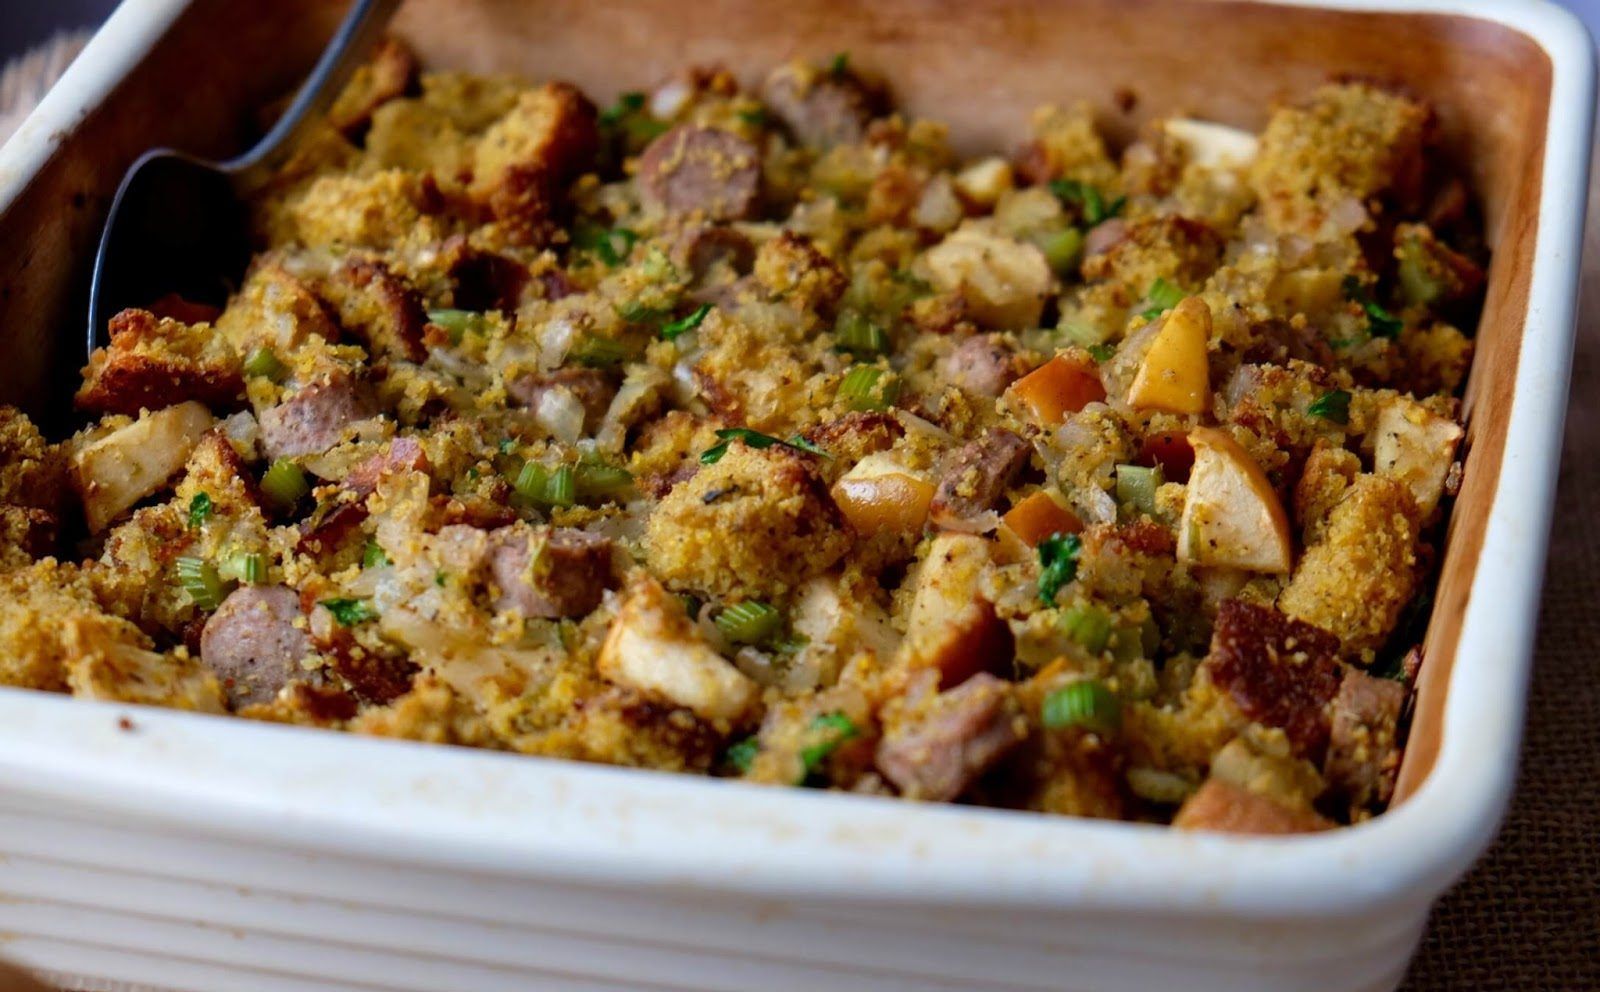 cornbread stuffing with apples and sausage